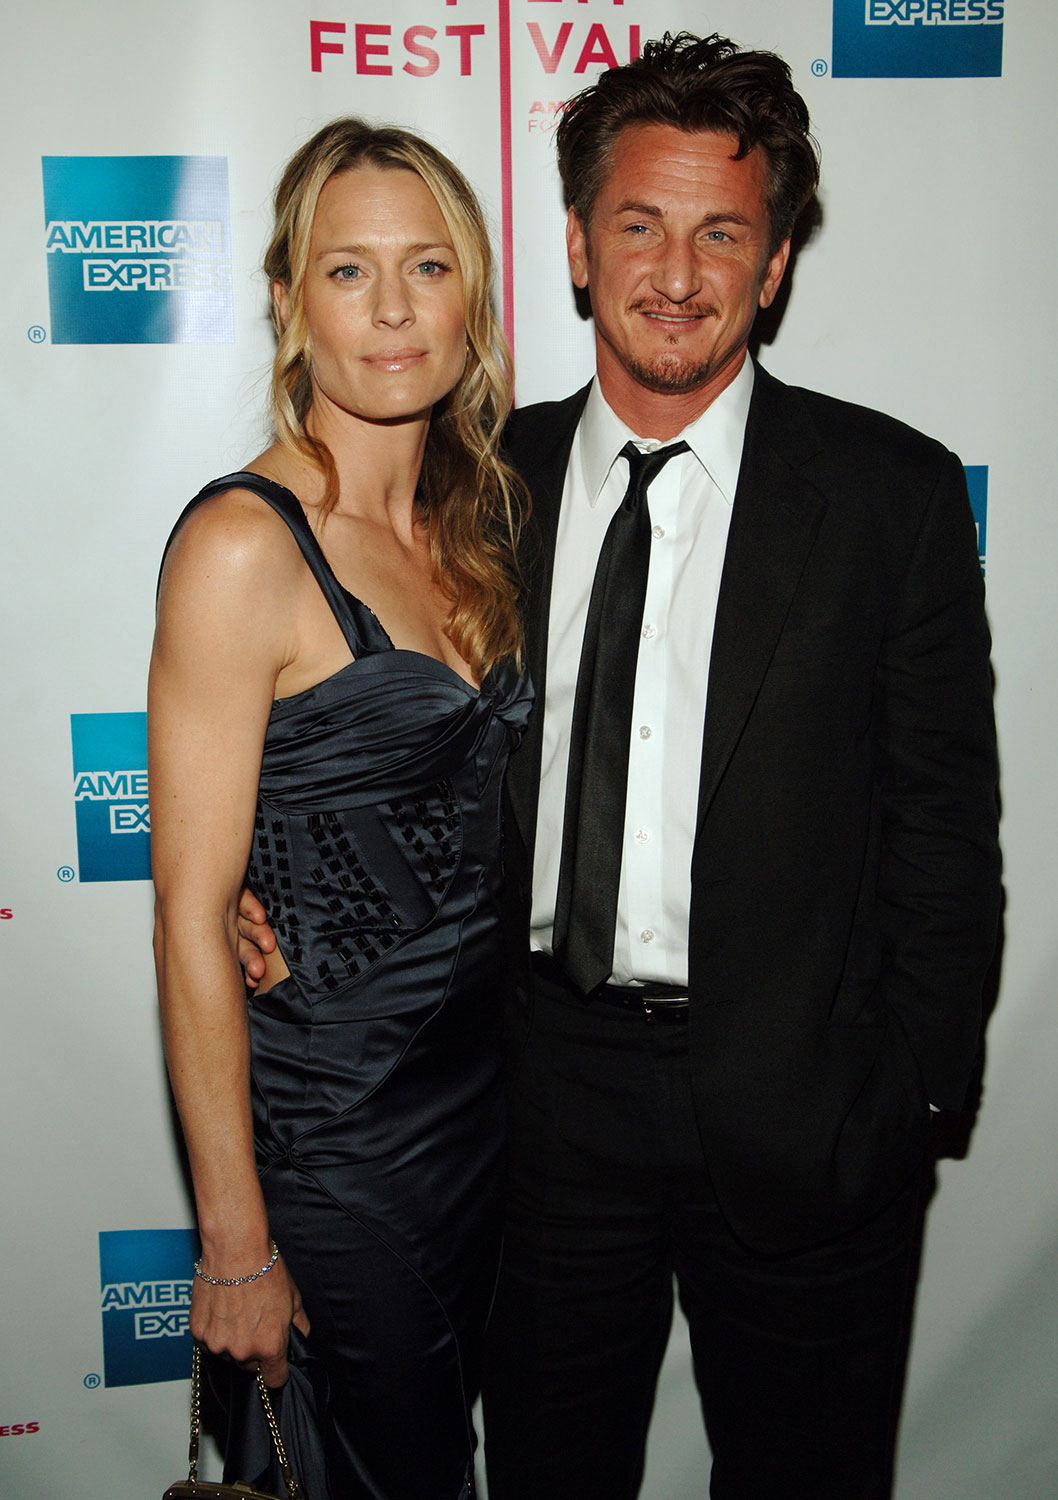 The cheekbones in question belong to none other than House of Cards actress Robin Wright, who was married to Dylan’s father Sean Penn for 14 years before divorcing in 2010. Photo / Getty Images